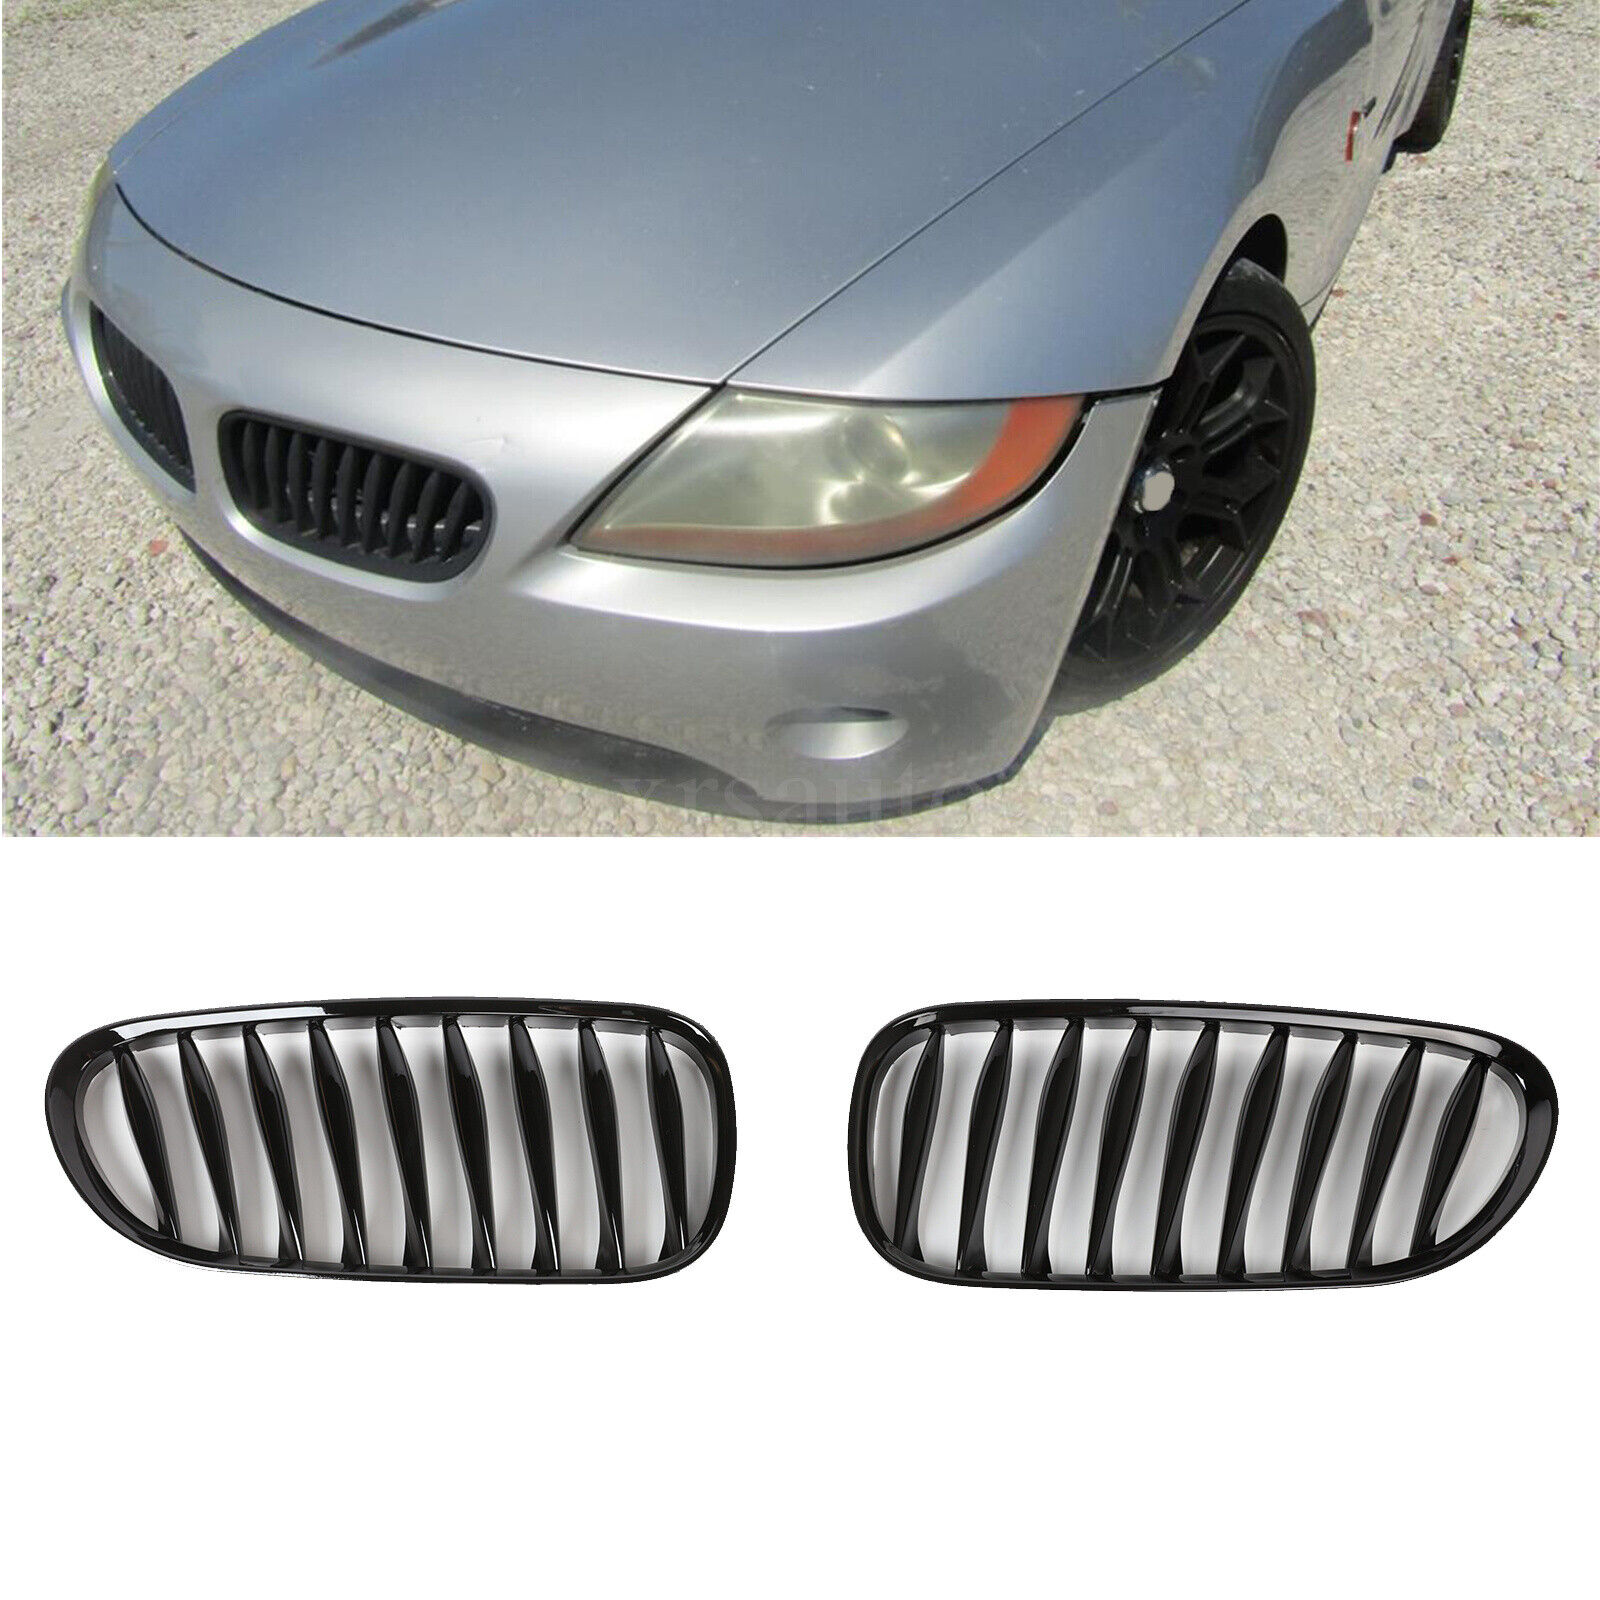 Grilles Grill For BMW Z4 Front Bumper E85 E86 Coupe Roadster Gloss Black 03-09